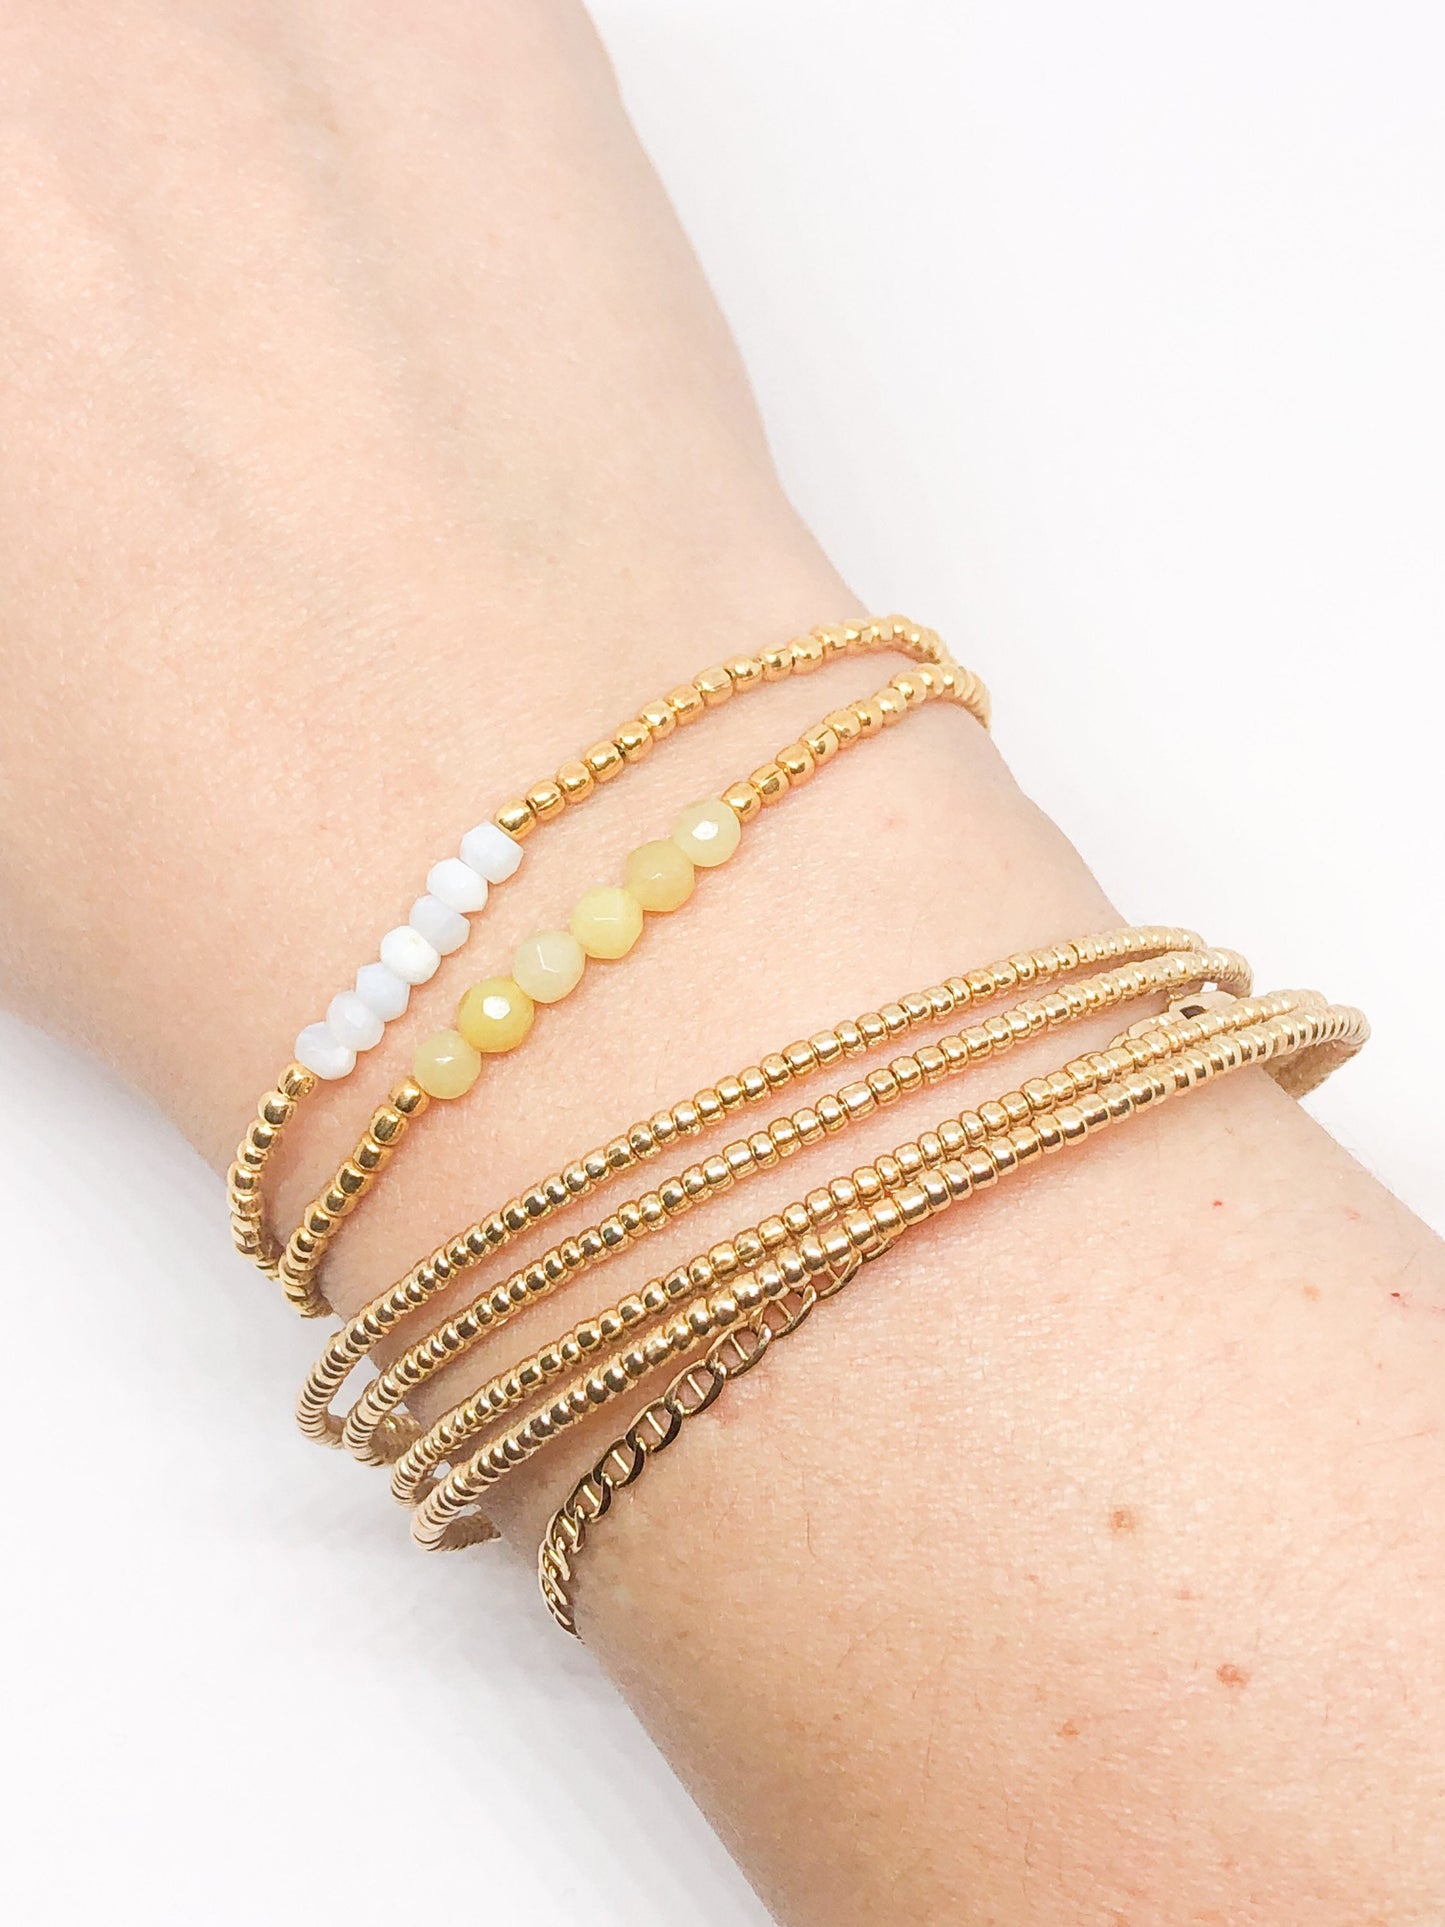 Spring Memory Wire Bracelet - Living a Real Life